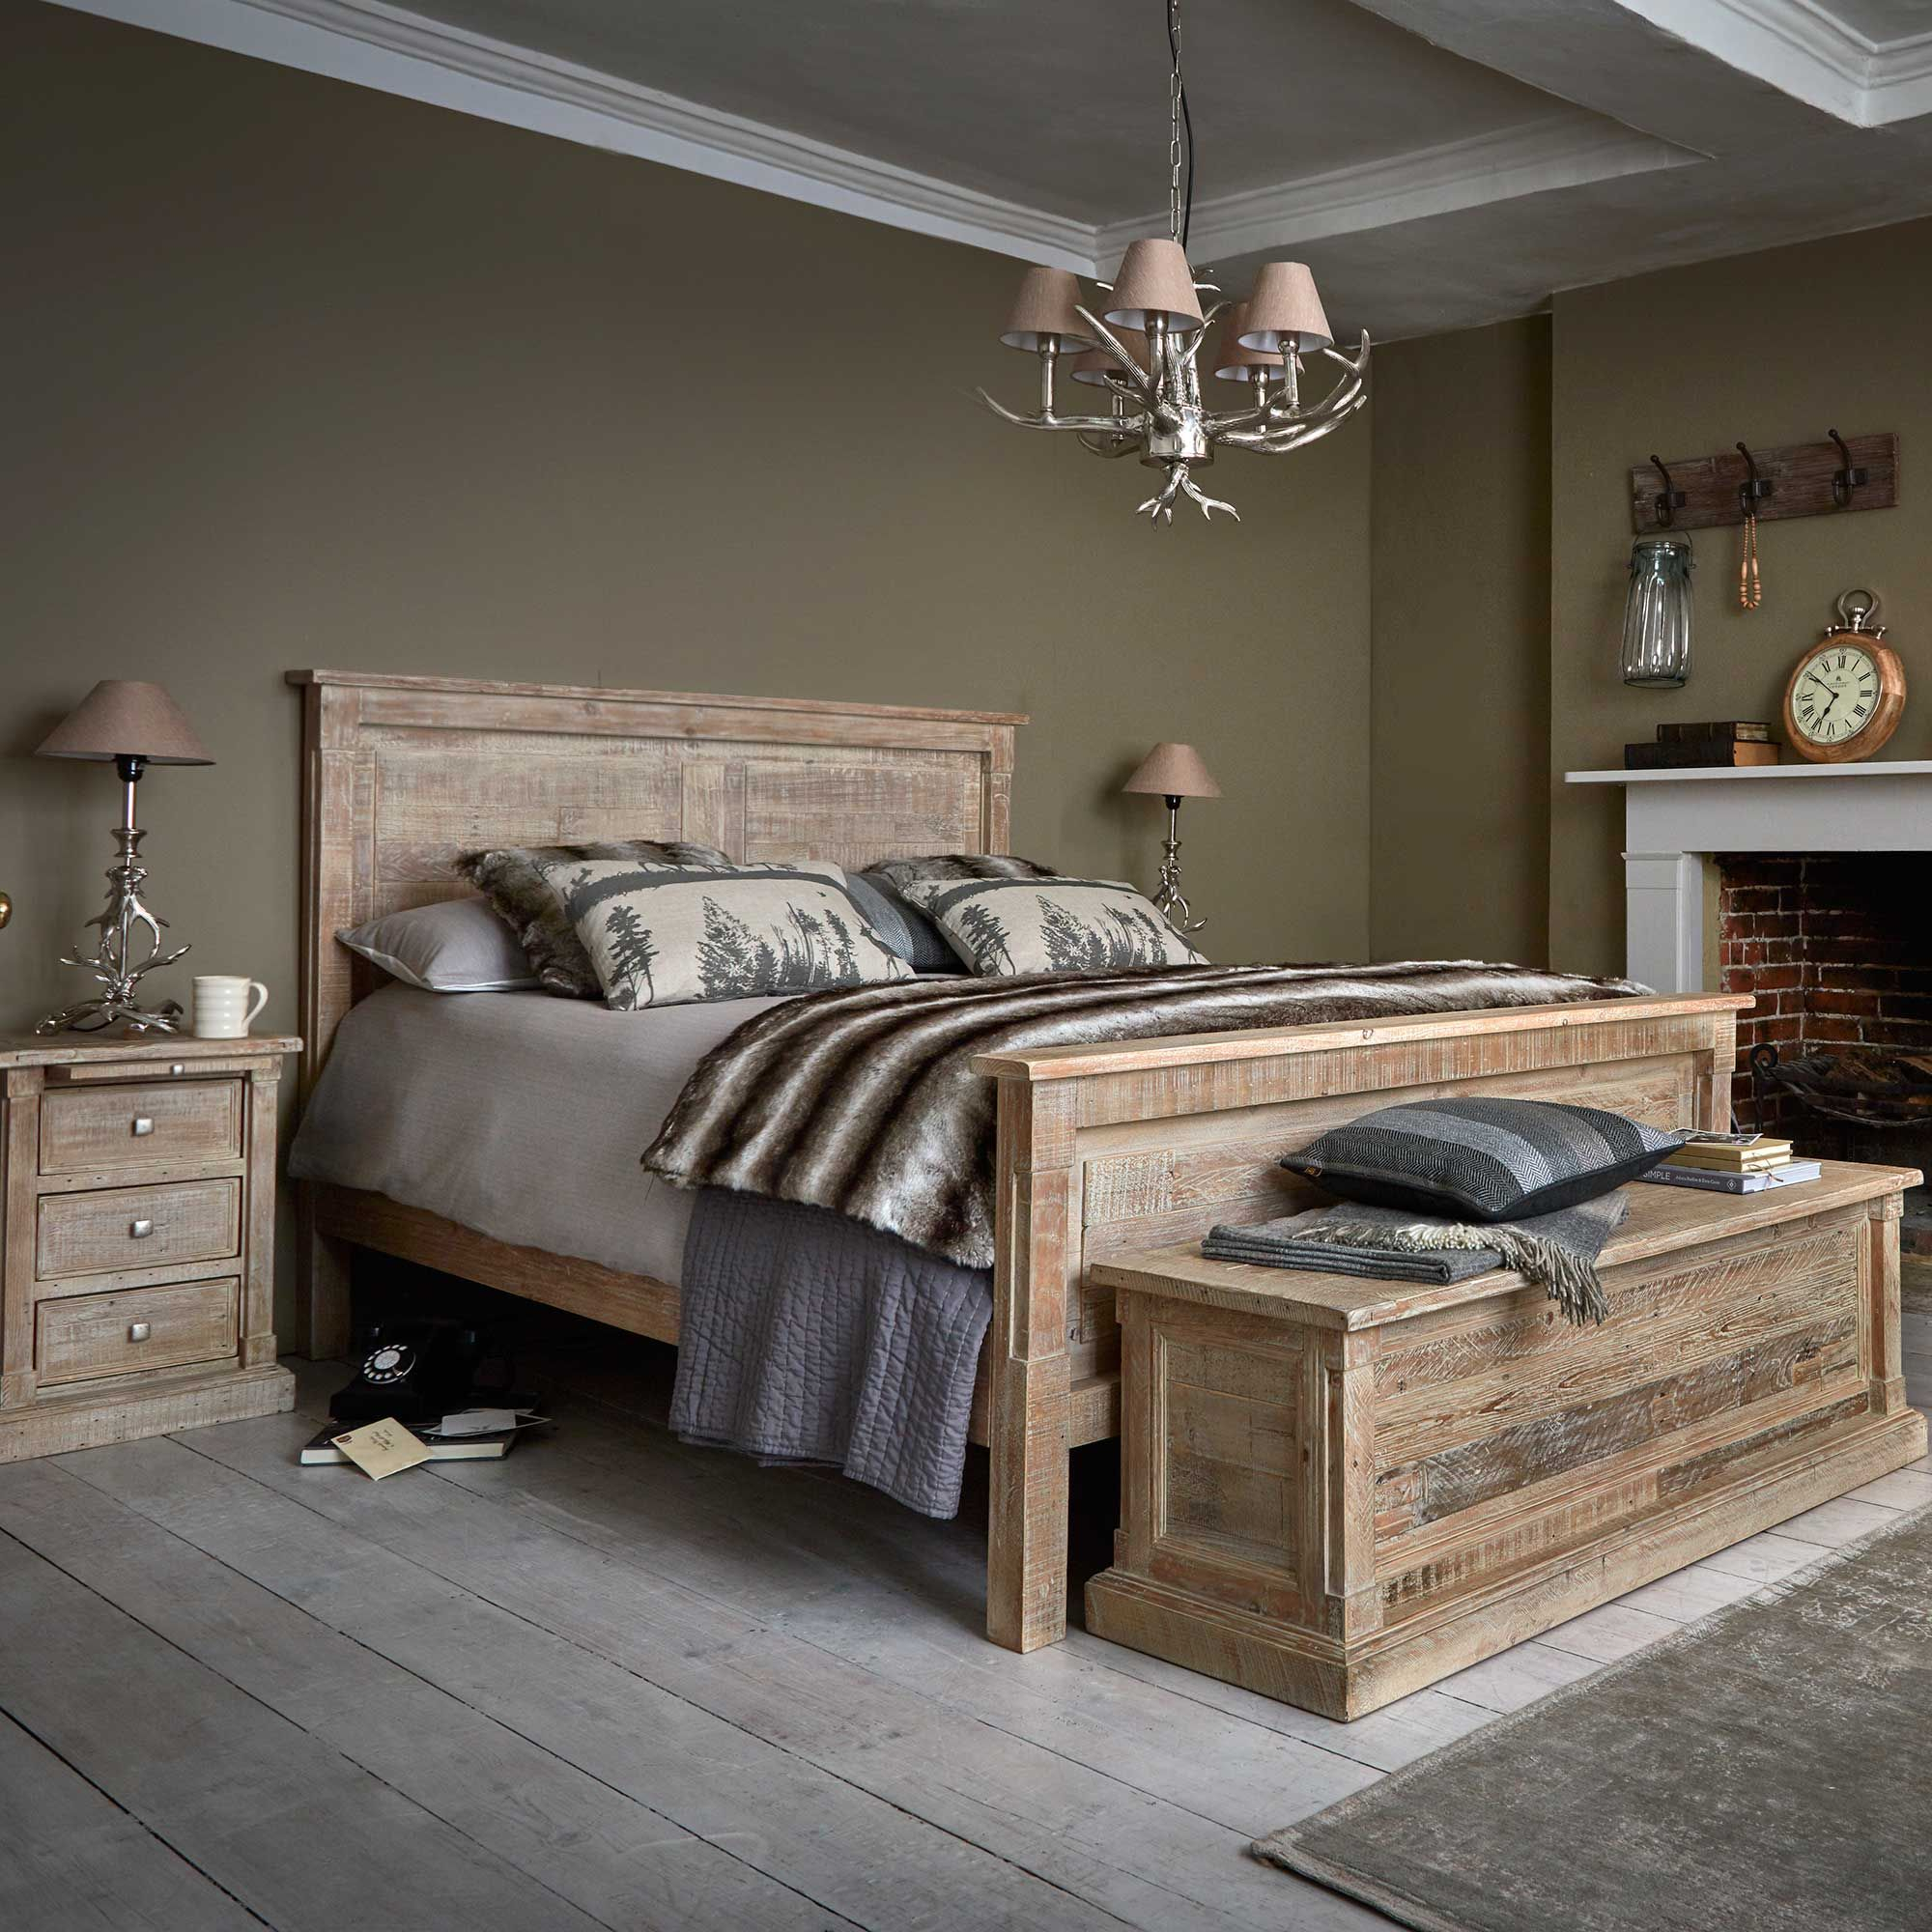 The Austen Bedroom Furniture Range Has A Nautical Rustic Feel With intended for measurements 2000 X 2000